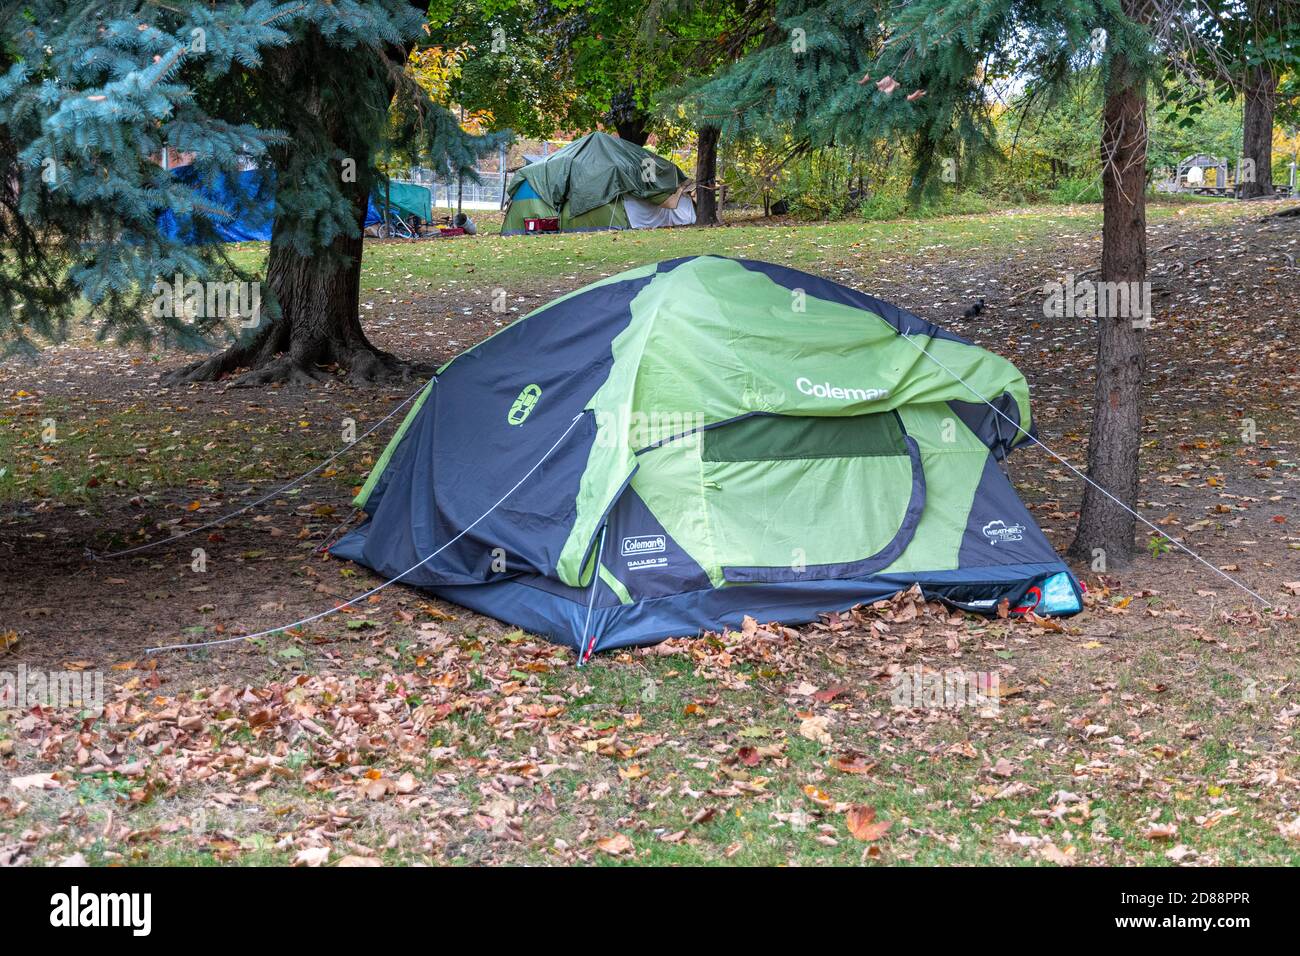 Tents of homeless people in public city parks. The Coronavirus pandemic has exacerbated the social issues in the country. Some prefer public parks to Stock Photo